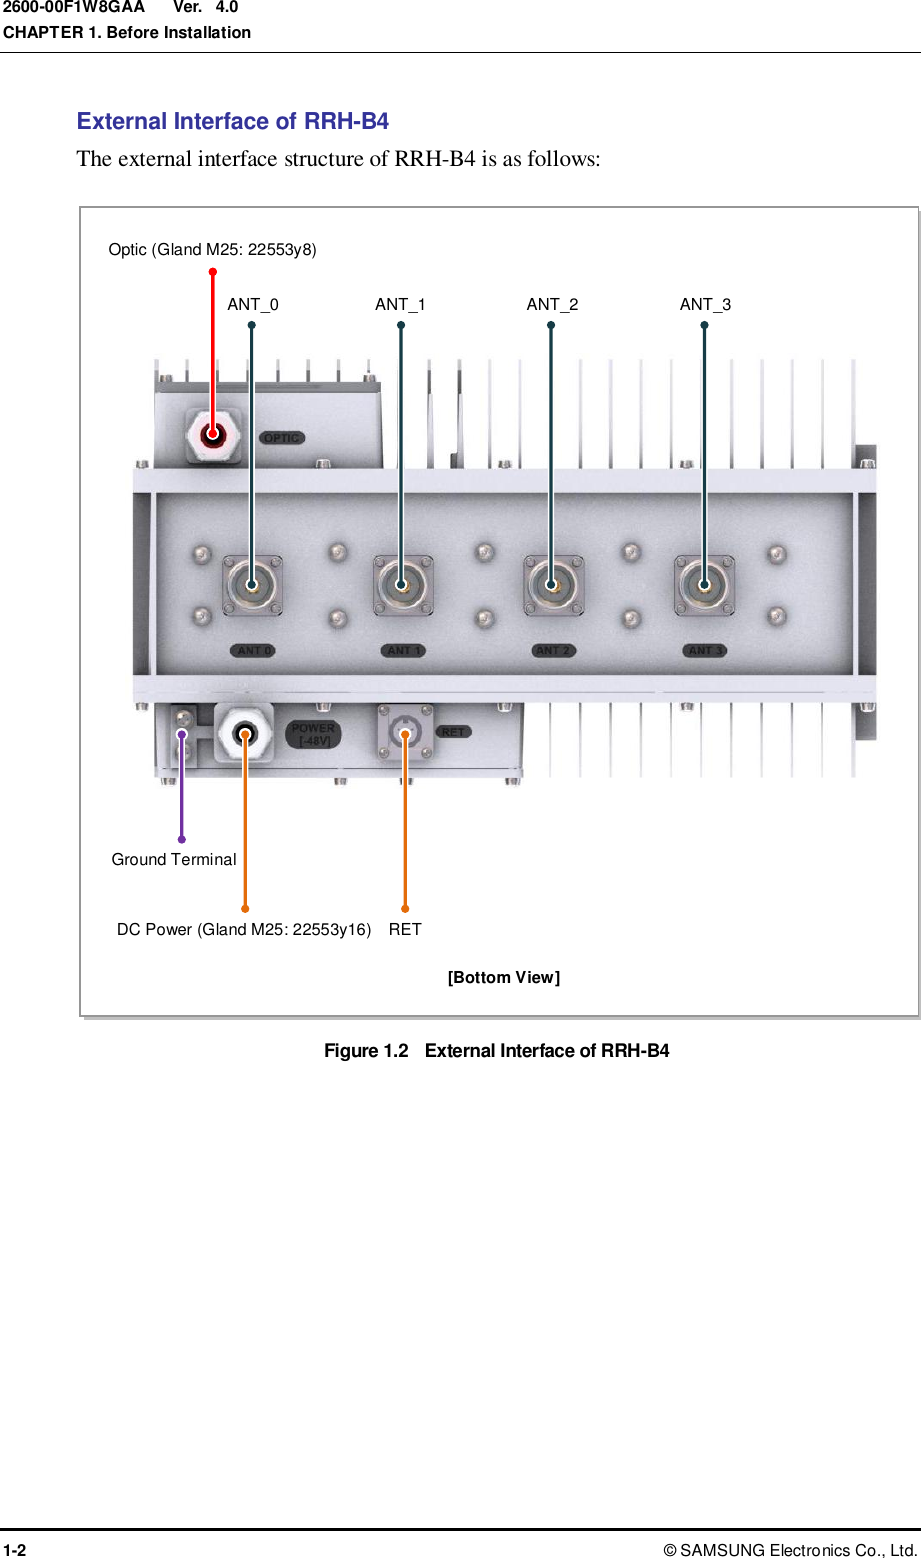  Ver.  CHAPTER 1. Before Installation 1-2 ©  SAMSUNG Electronics Co., Ltd. 2600-00F1W8GAA 4.0 External Interface of RRH-B4 The external interface structure of RRH-B4 is as follows:  Figure 1.2    External Interface of RRH-B4  [Bottom View] DC Power (Gland M25: 22553y16) RET ANT_0 Optic (Gland M25: 22553y8) Ground Terminal ANT_1 ANT_2 ANT_3 